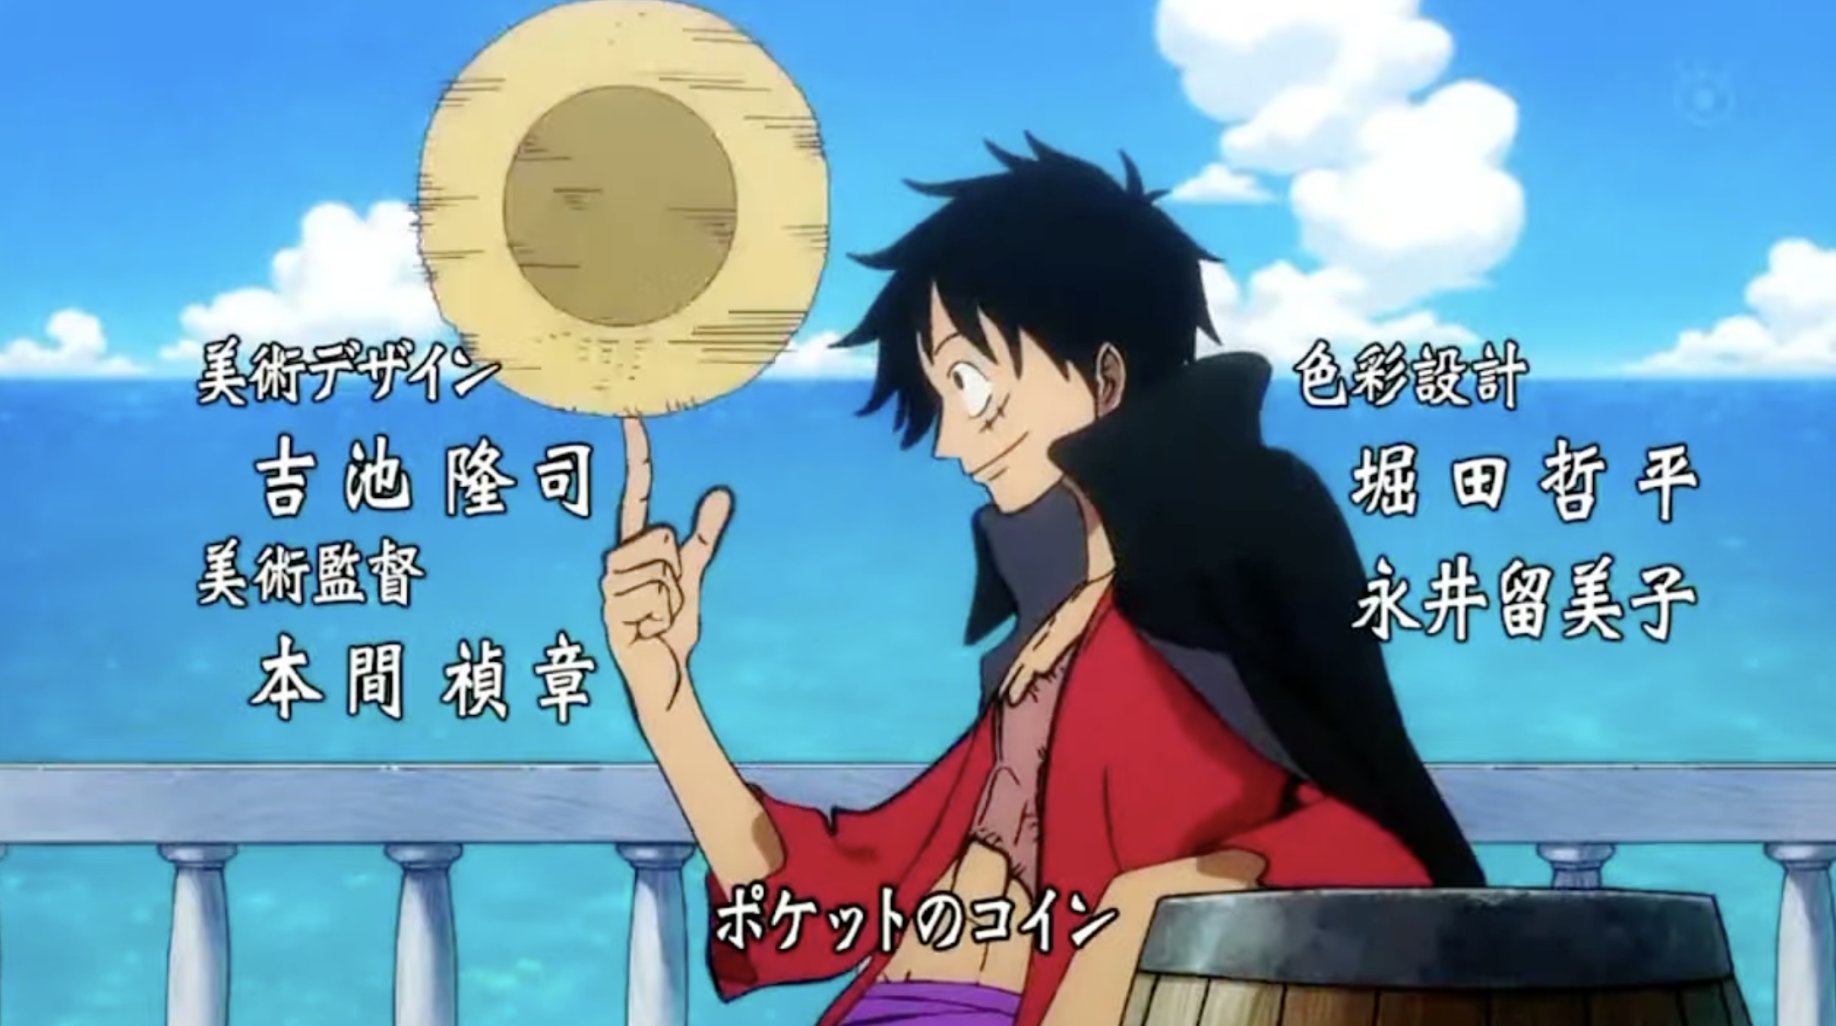 Artur Library Of Ohara One Piece Opening 24 T Co Hfyejf7l09 T Co Cecauqqals Twitter